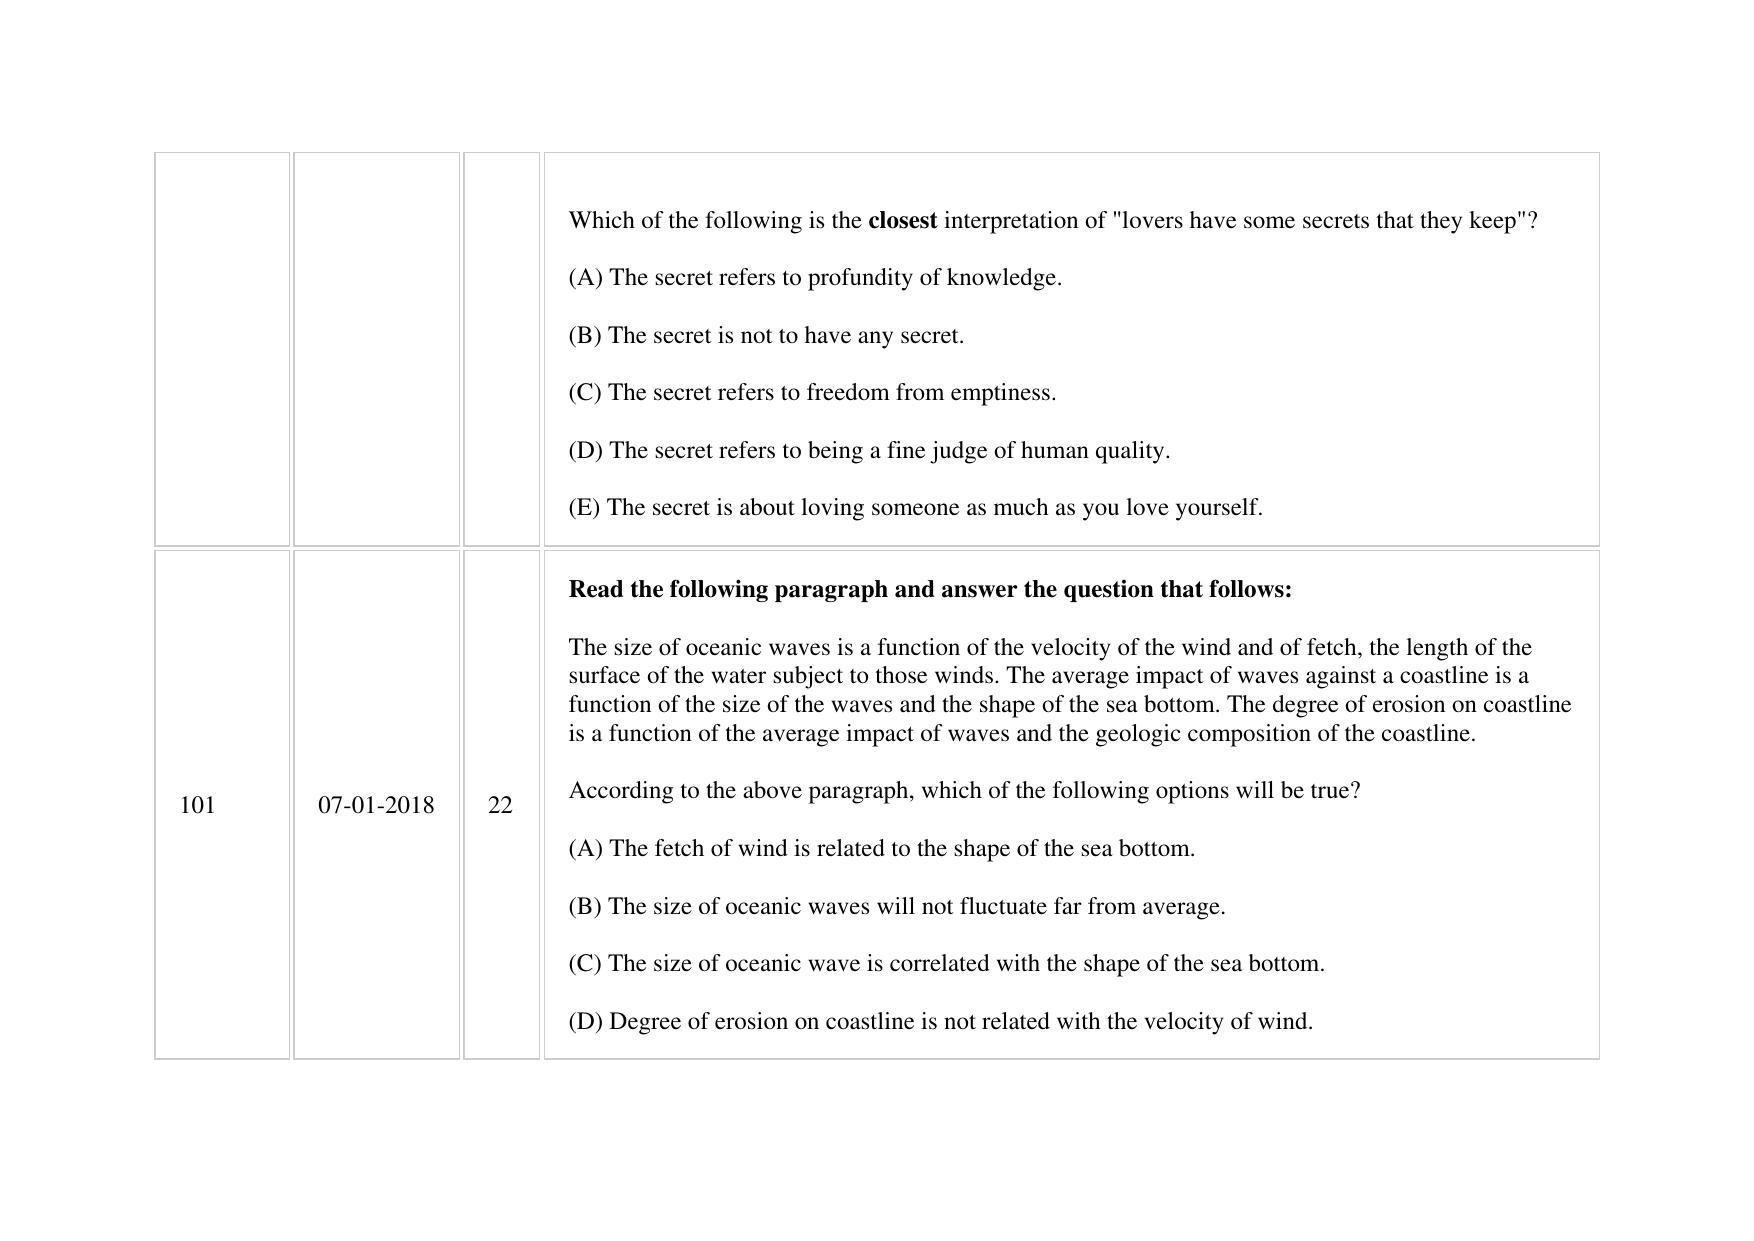 XAT 2018 Question Paper - Page 30